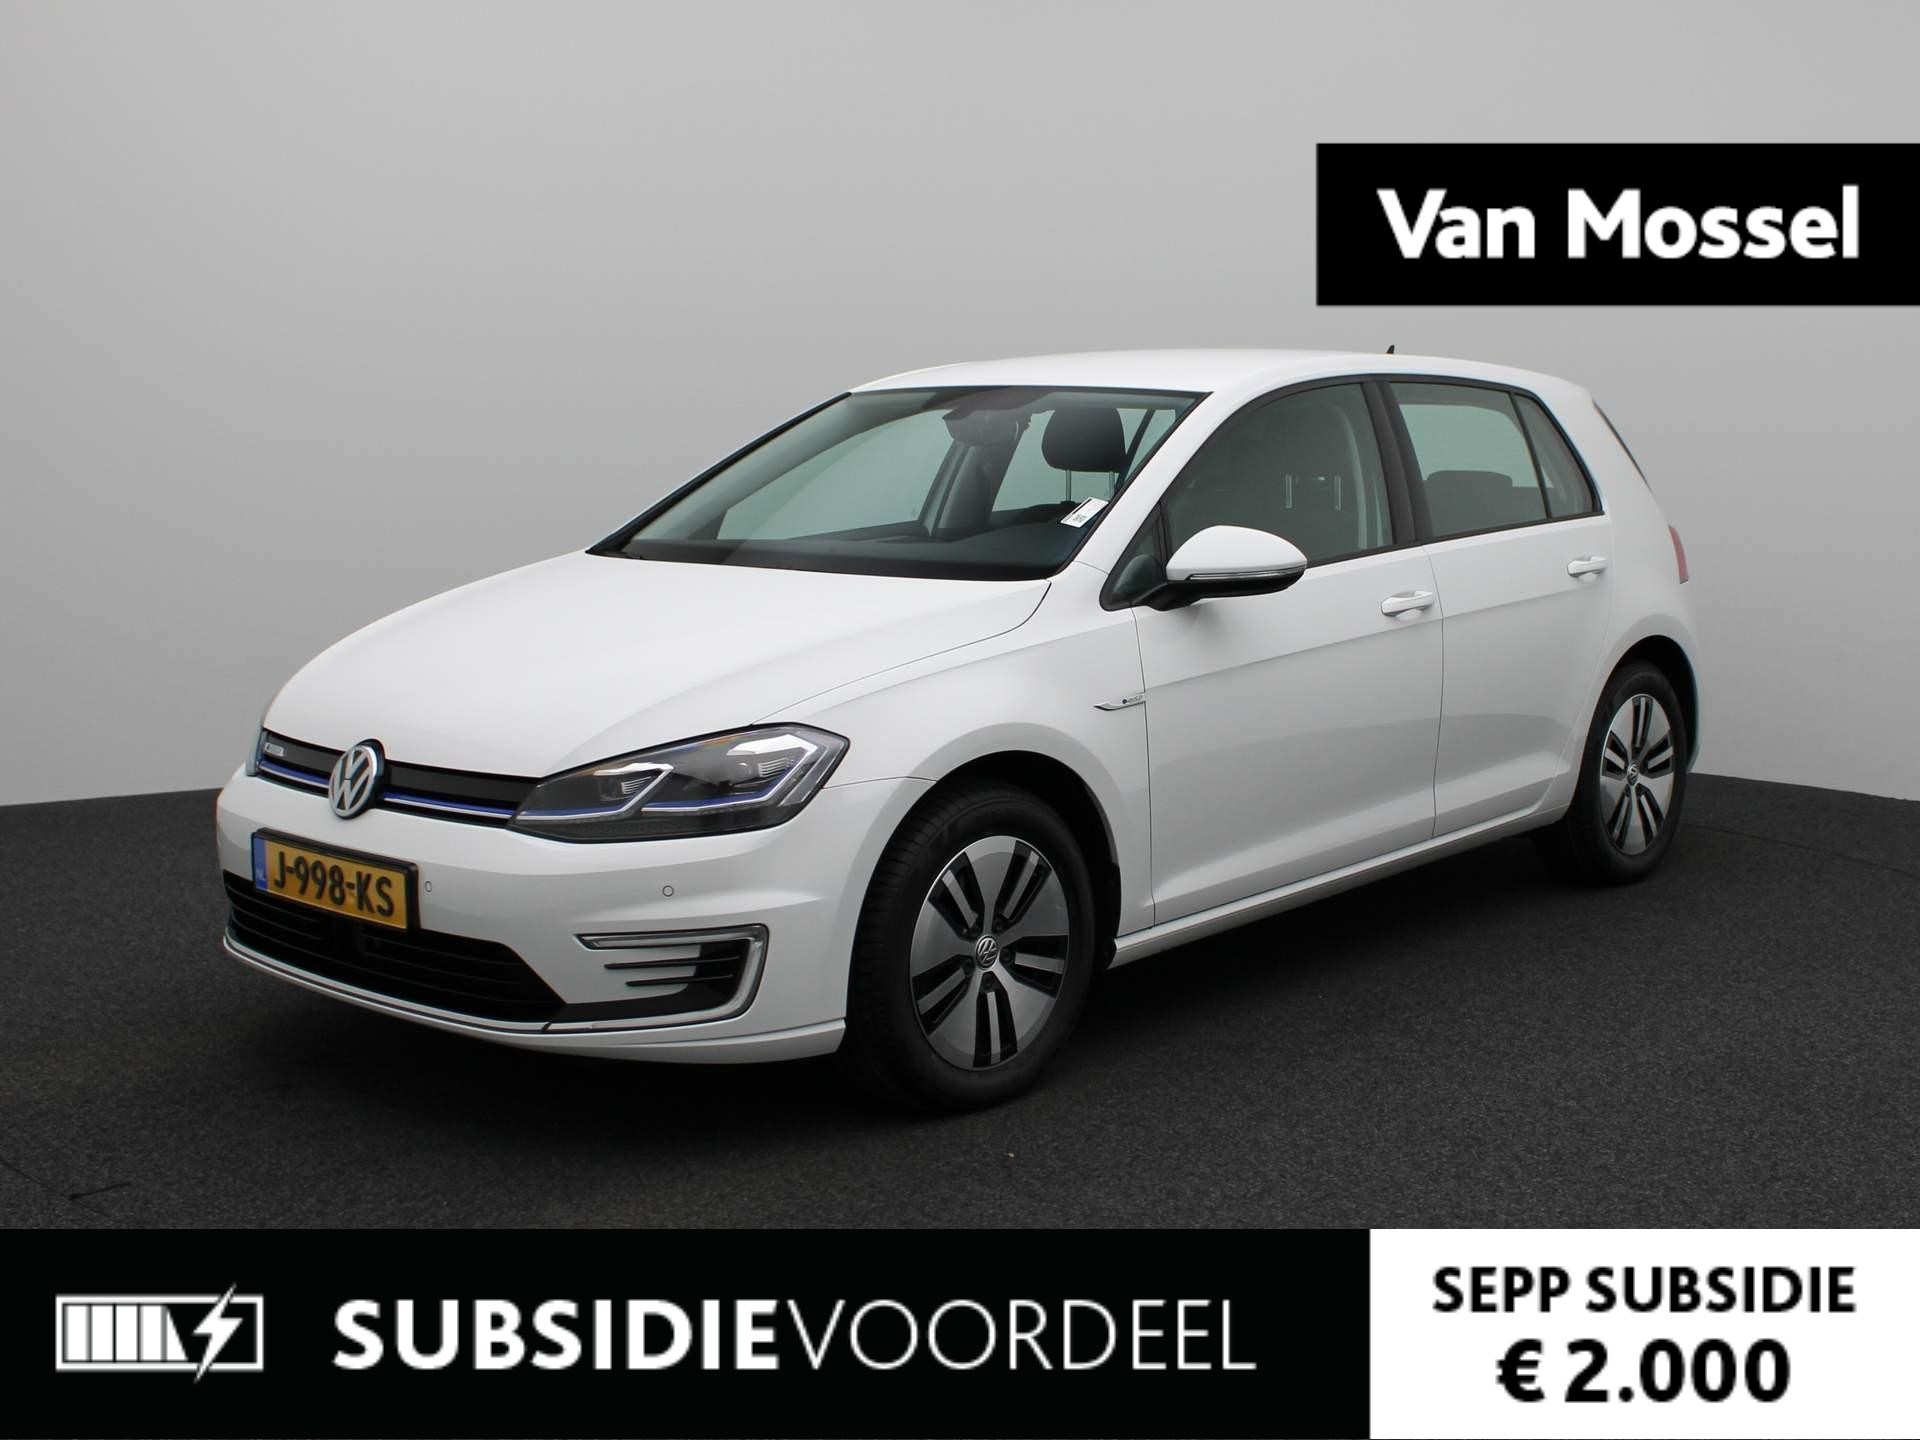 Volkswagen e-Golf E-DITION | Subsidie € 2.000,- | Warmte Pomp | Navi | Apple-Android Play | Adaptive Cruise | PDC V+A | LED |